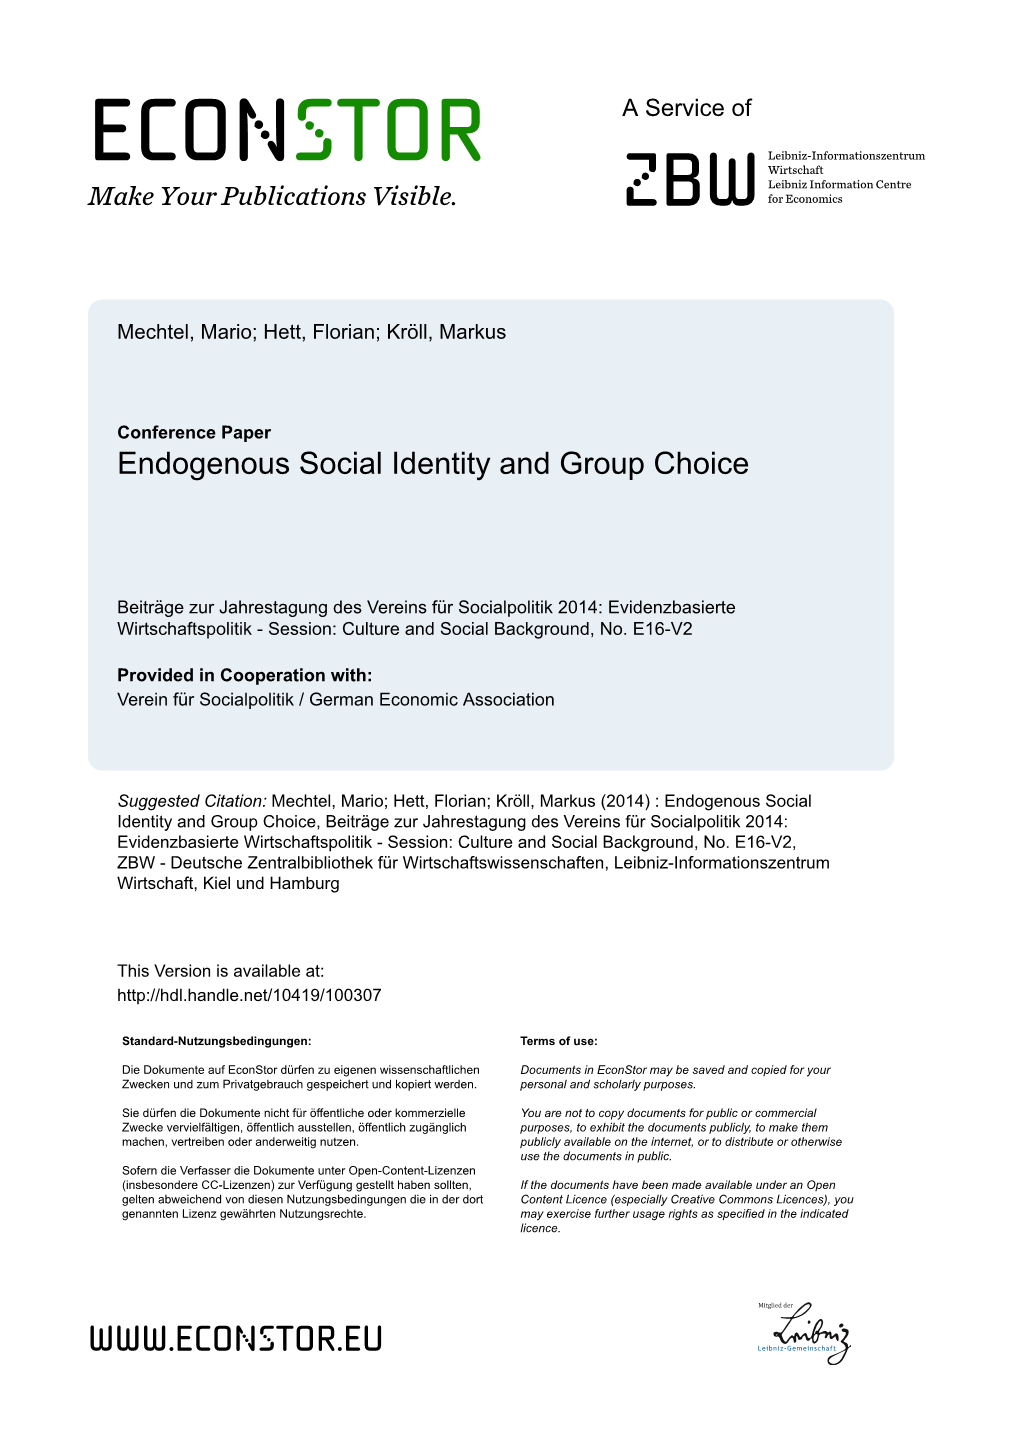 Endogenous Social Identity and Group Choice